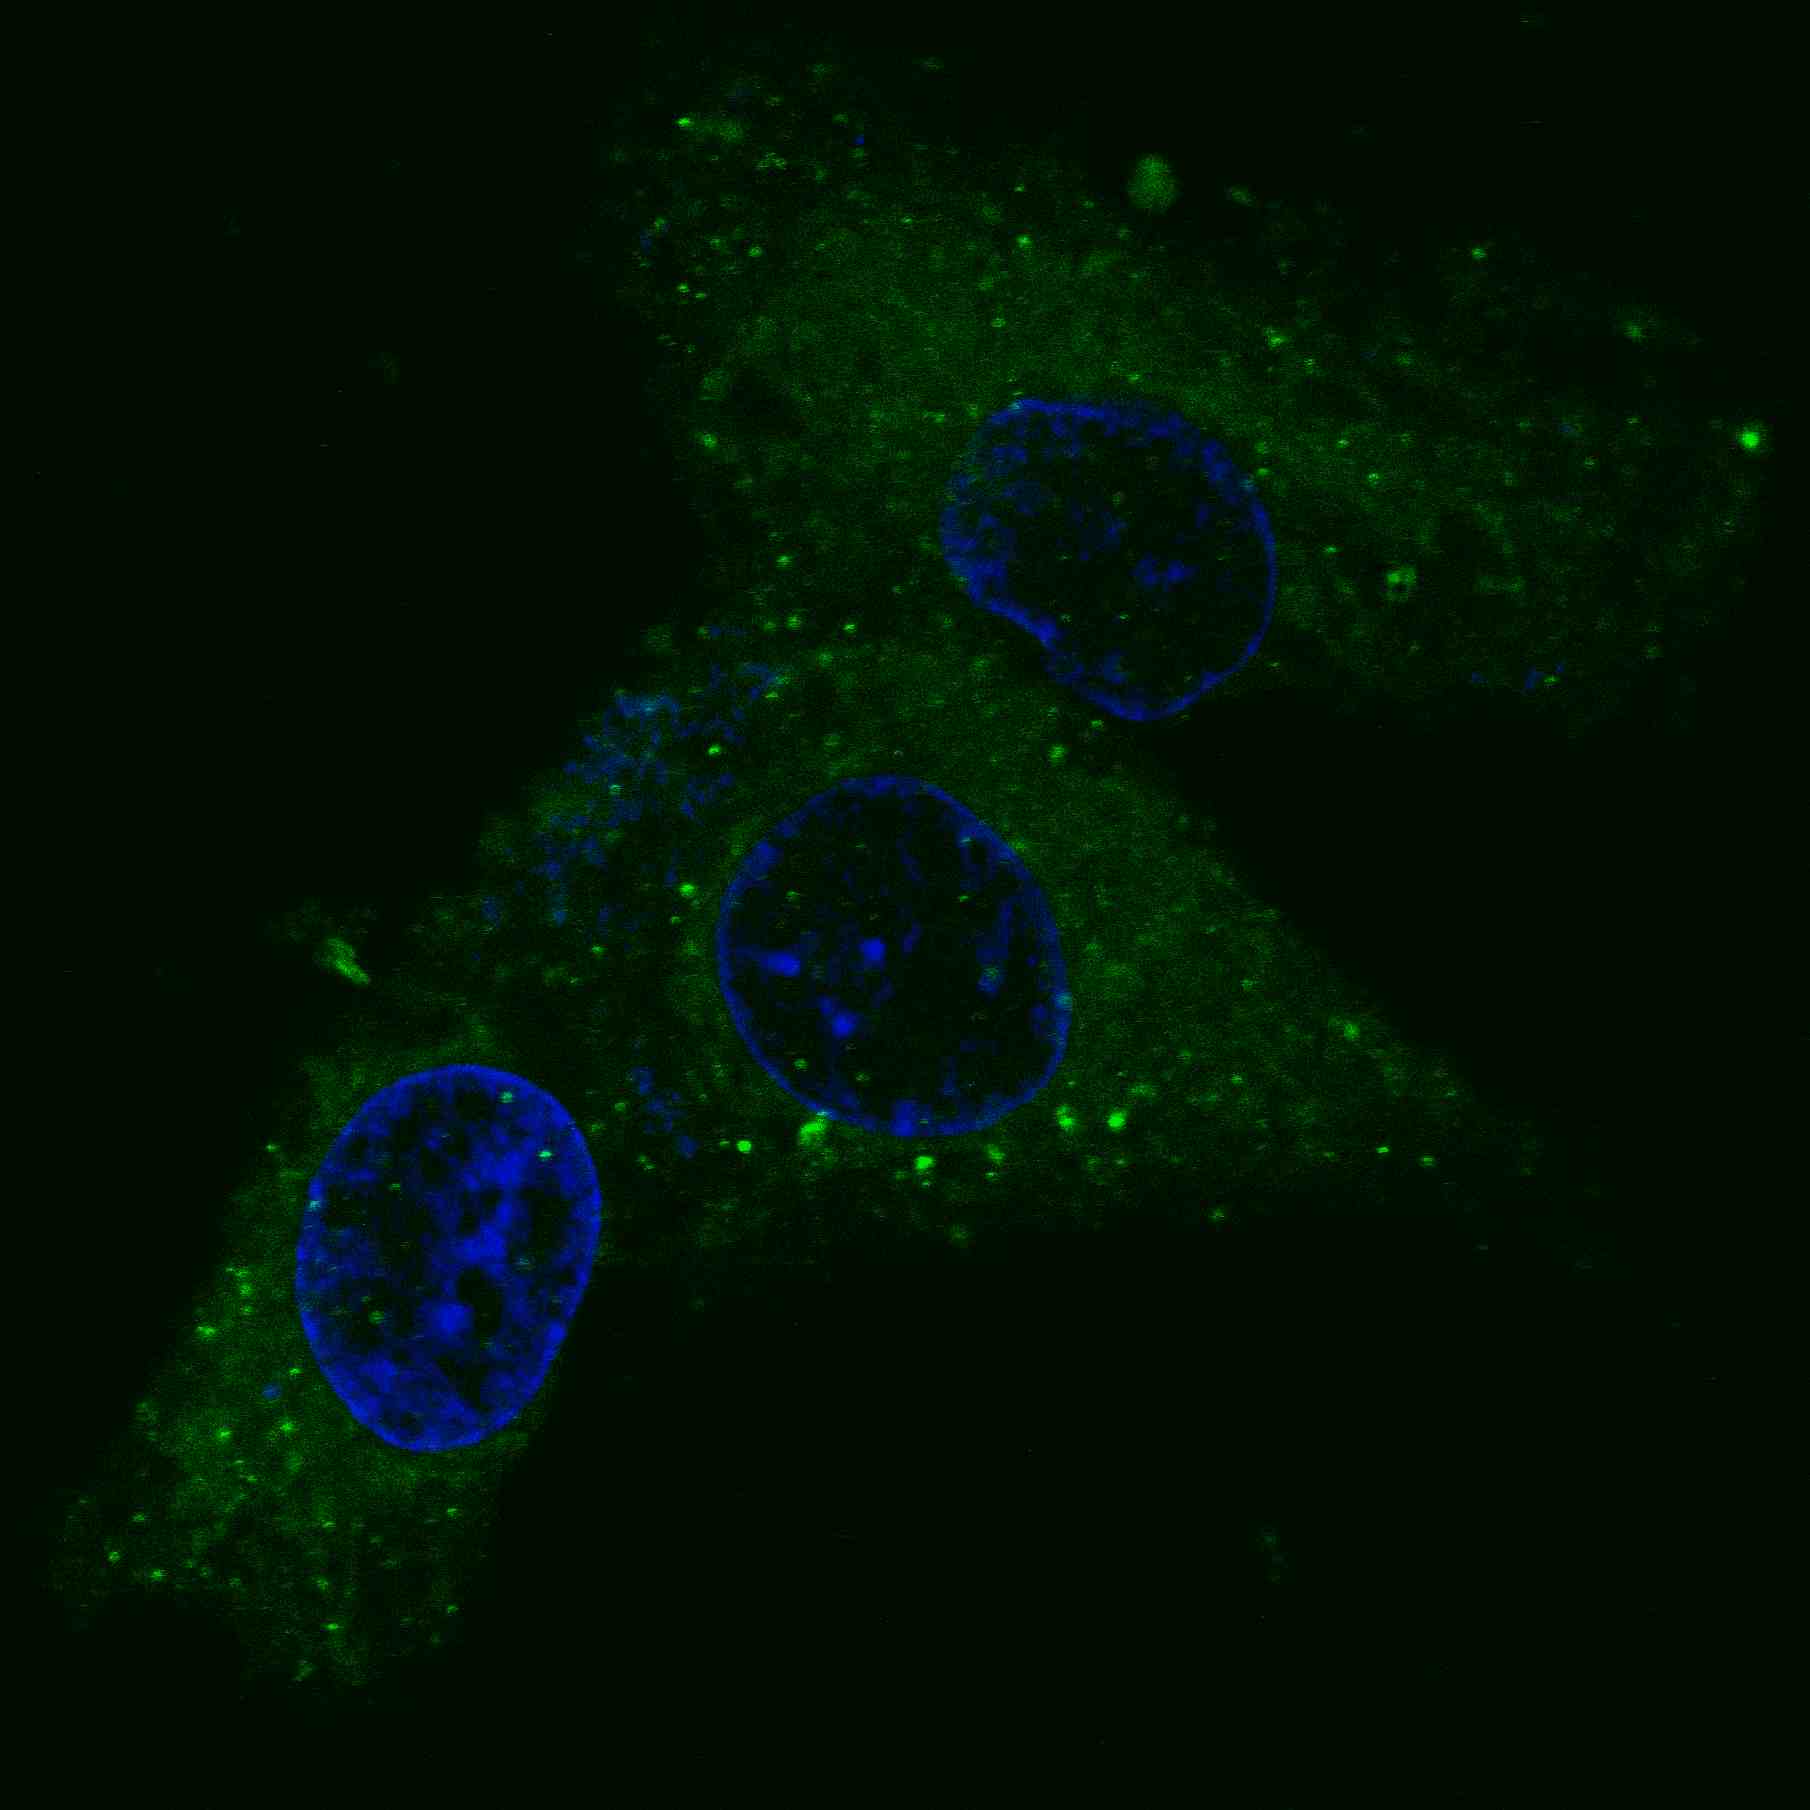 Fluorescent confocal image of HepG2 cells stained with MET/HGFR antibody. HepG2 cells were fixed with 4% PFA (20 min), permeabilized with Triton X-100 (0.2%, 30 min). Cells were then incubated with AM1001a MET/HGFR primary antibody (1:100, 2 h at room temperature). For secondary antibody, Alexa Fluor® 488 conjugated donkey anti-mouse antibody (green) was used (1:1000, 1h). Nuclei were counterstained with Hoechst 33342 (blue) (10 μg/ml, 5 min). Note the highly specific localization of the MET immunosignal to the cytoplasm, supported by Human Protein Atlas Data (http://www.proteinatlas.org/ENSG00000105976).